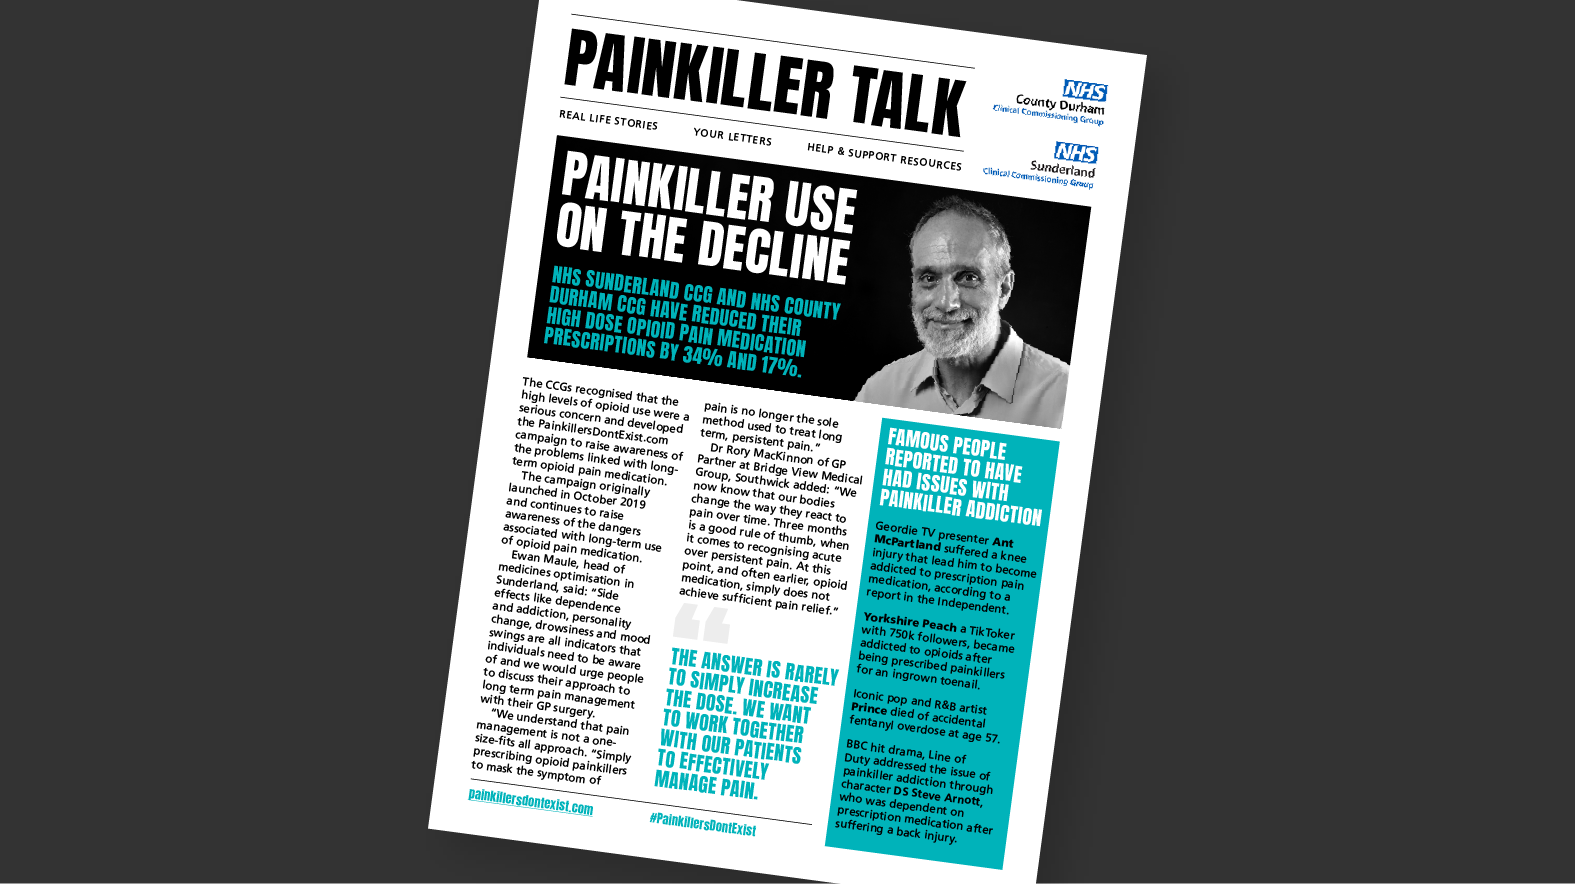 Link to download painkillers newsletter